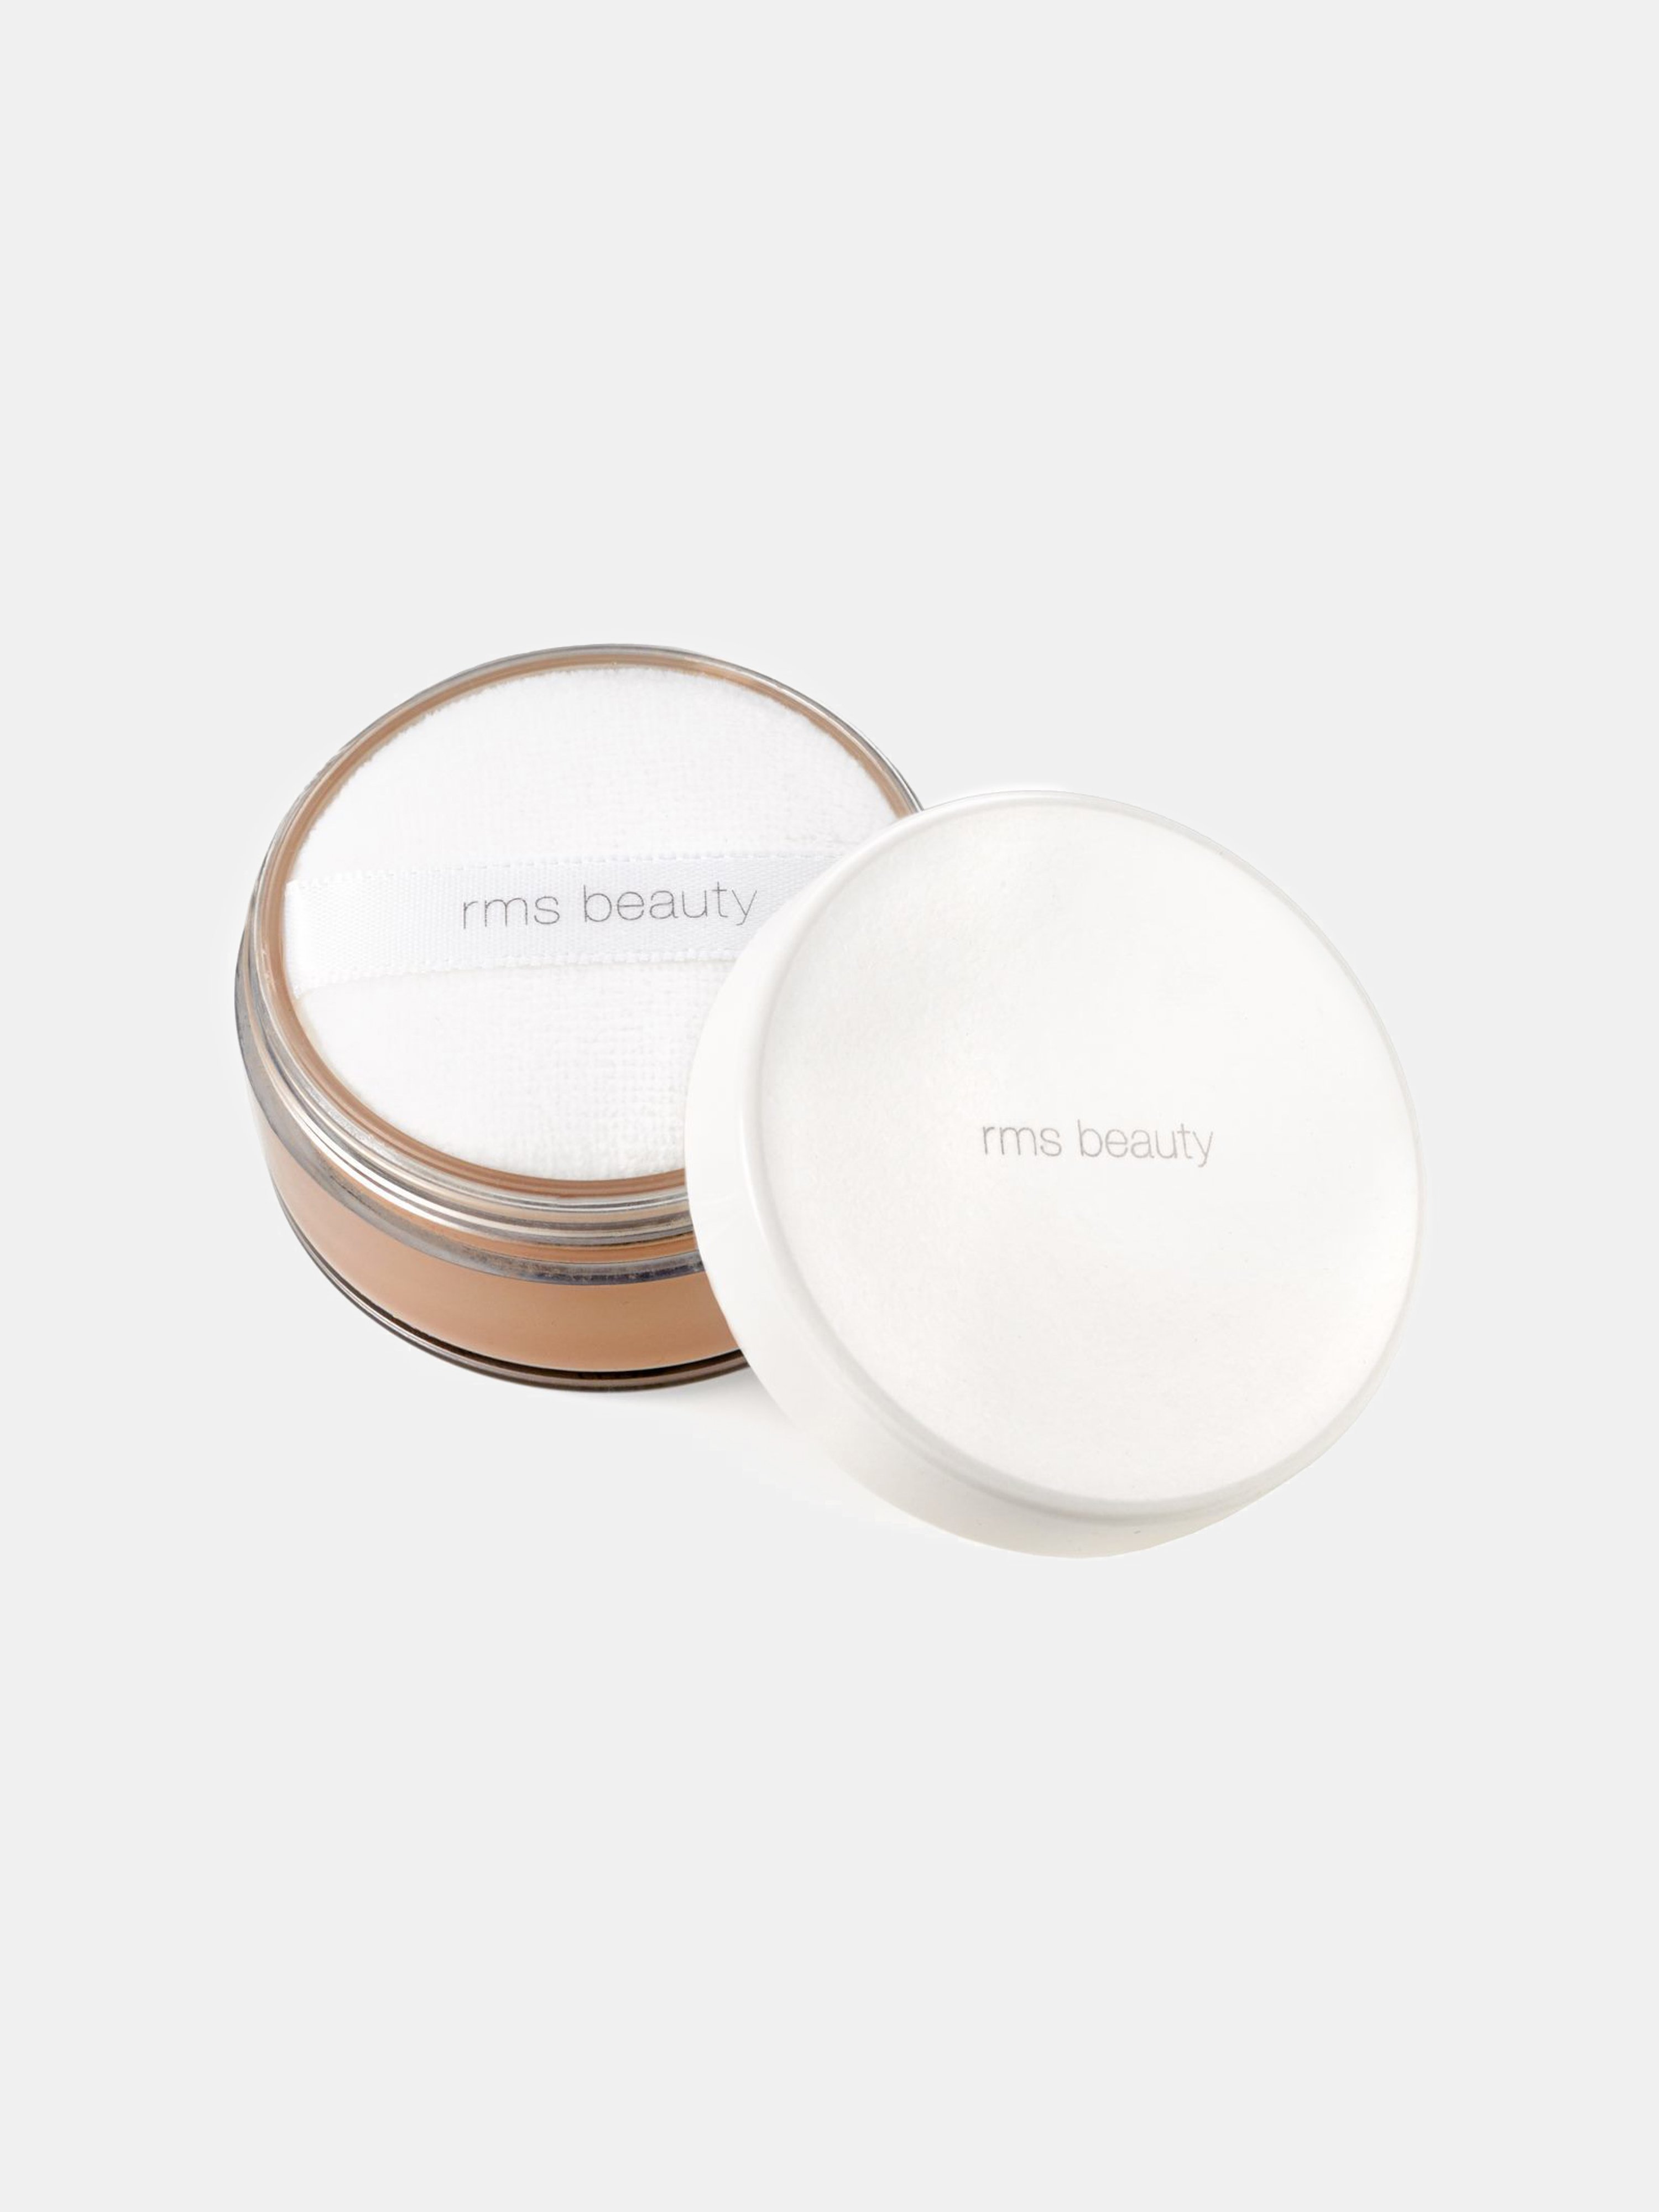 RMS BEAUTY RMS BEAUTY TINTED "UN"POWDER